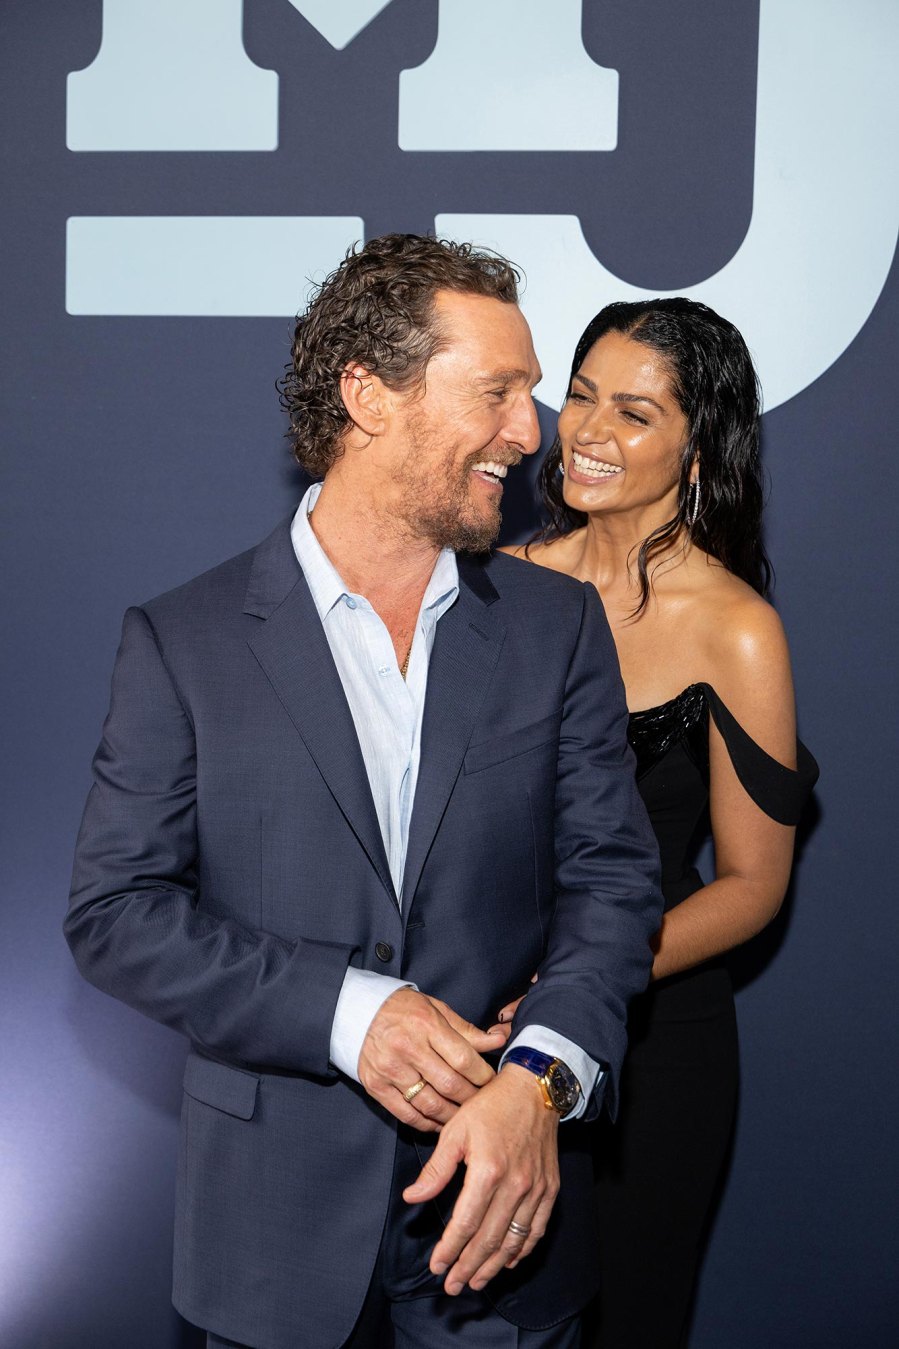 A Complete Timeline of Matthew McConaughey and Camila Alves Relationship